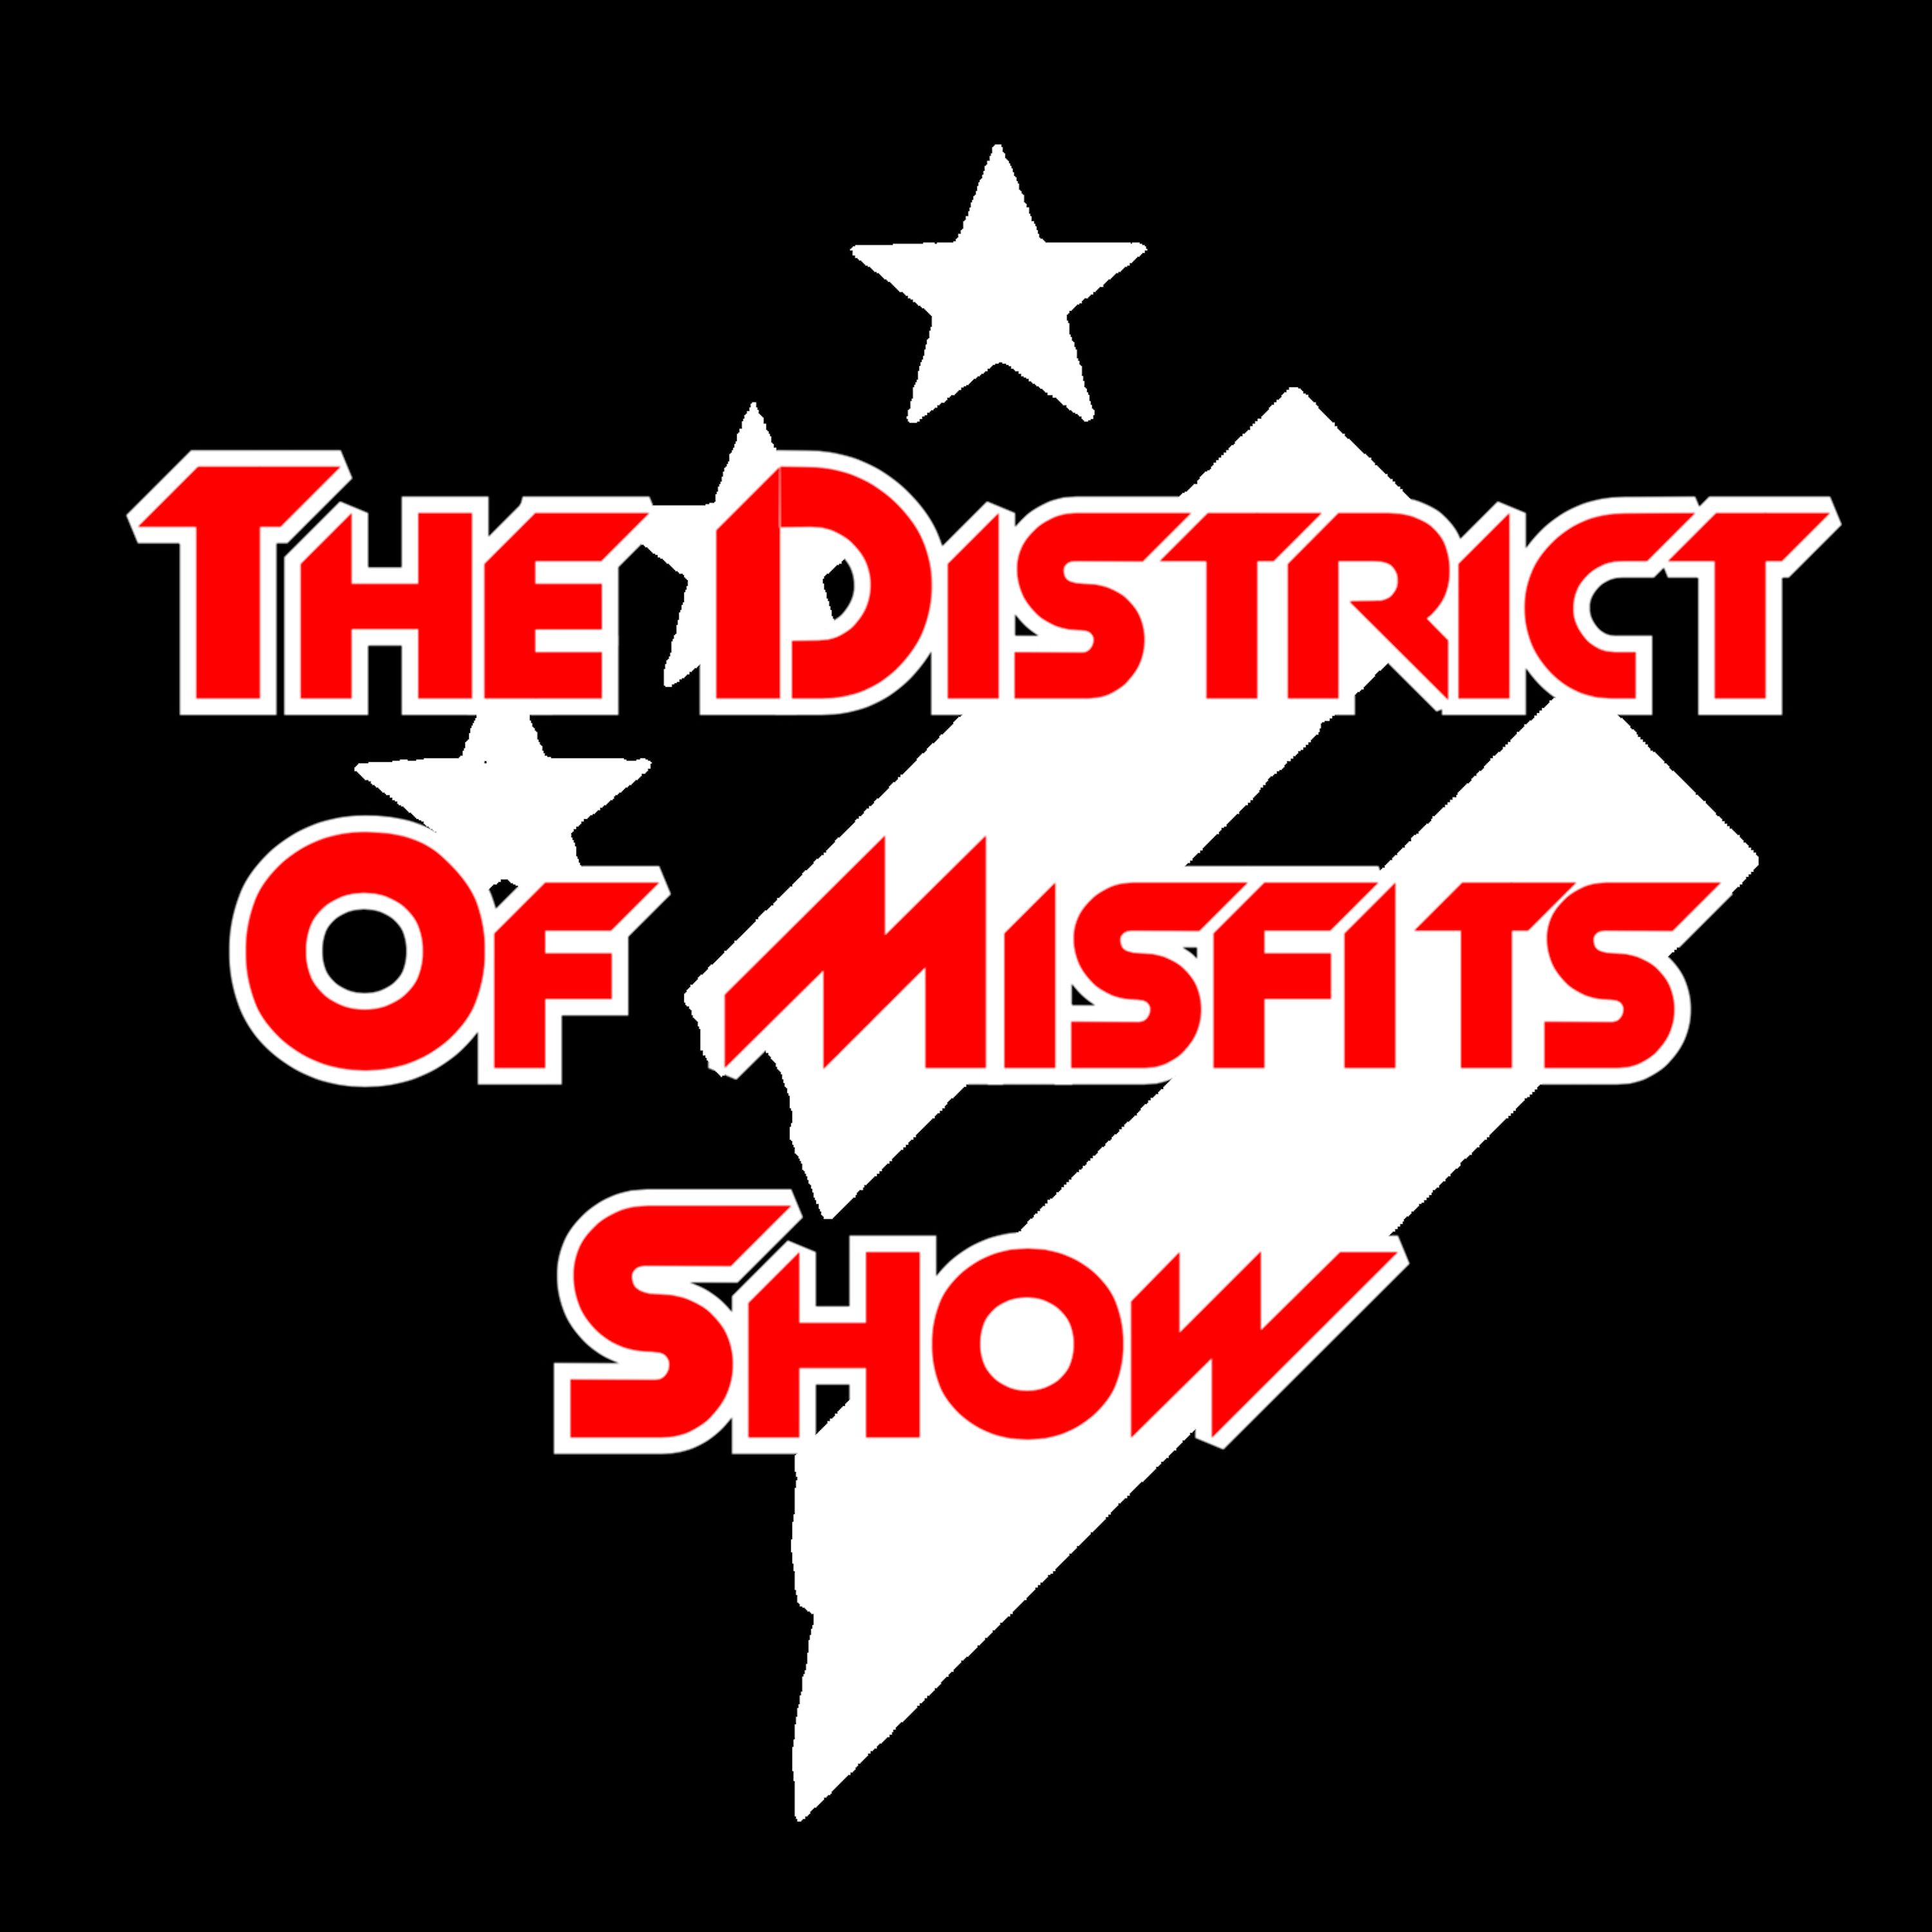 Show artwork for The District of Misfits show